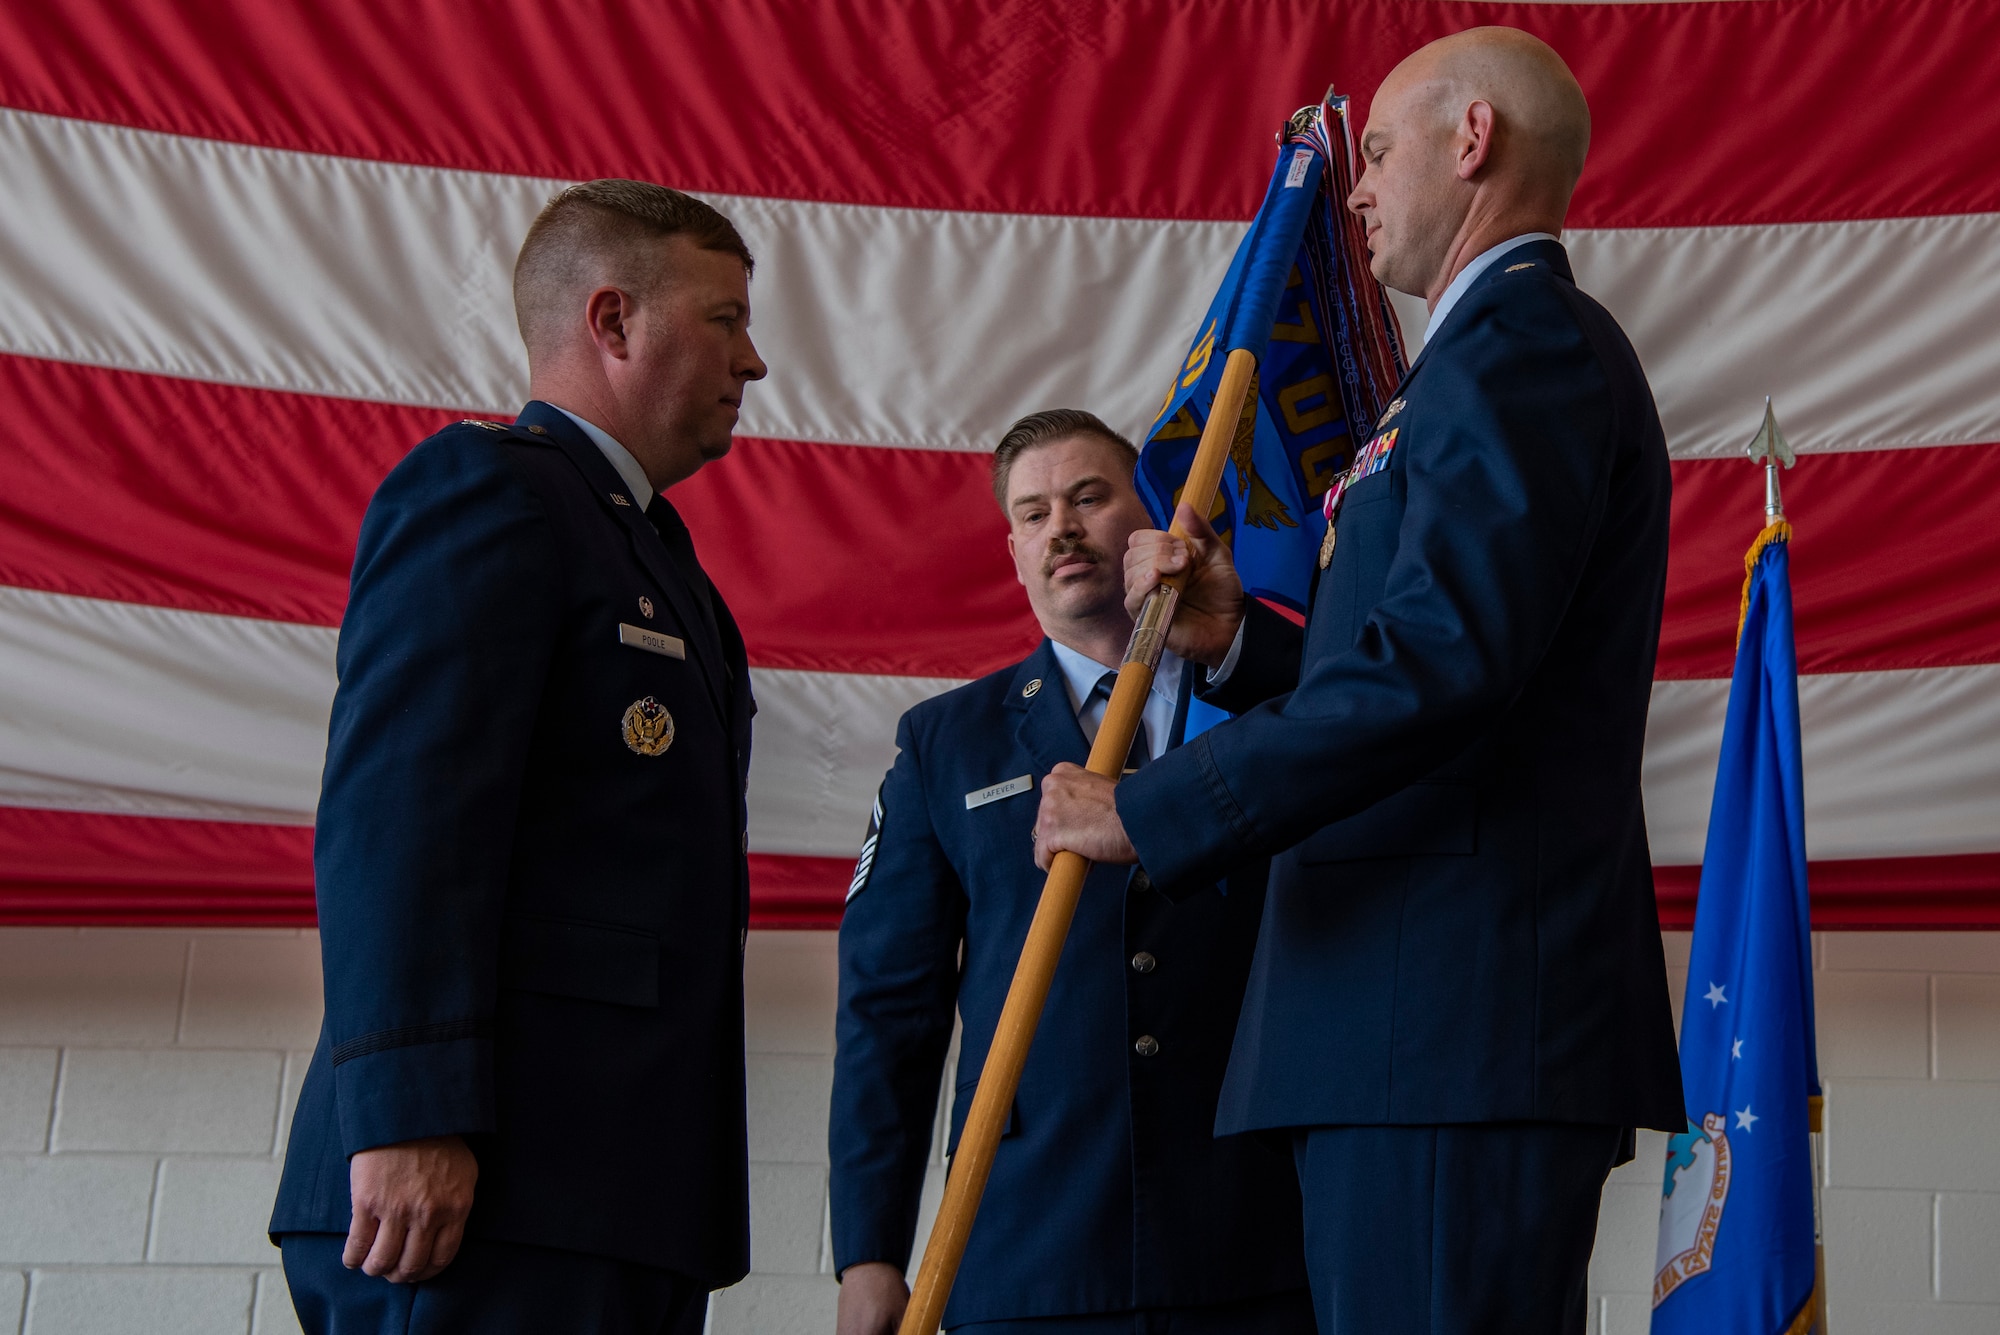 Lt. Col. Brenton Gaylord, outgoing 317th Operations Support Squadron commander, right, takes the guidon from Col. John Poole, 317th Operations Group commander, left, during the 317th OSS change of command ceremony at Dyess Air Force Base, Texas, June 30, 2022. The 317th OSS has approximately 130 personnel who oversee organizing, training and equipping the aircrews of the 317th Airlift Wing. (U.S. Air Force photo by Airman 1st Class Ryan Hayman)